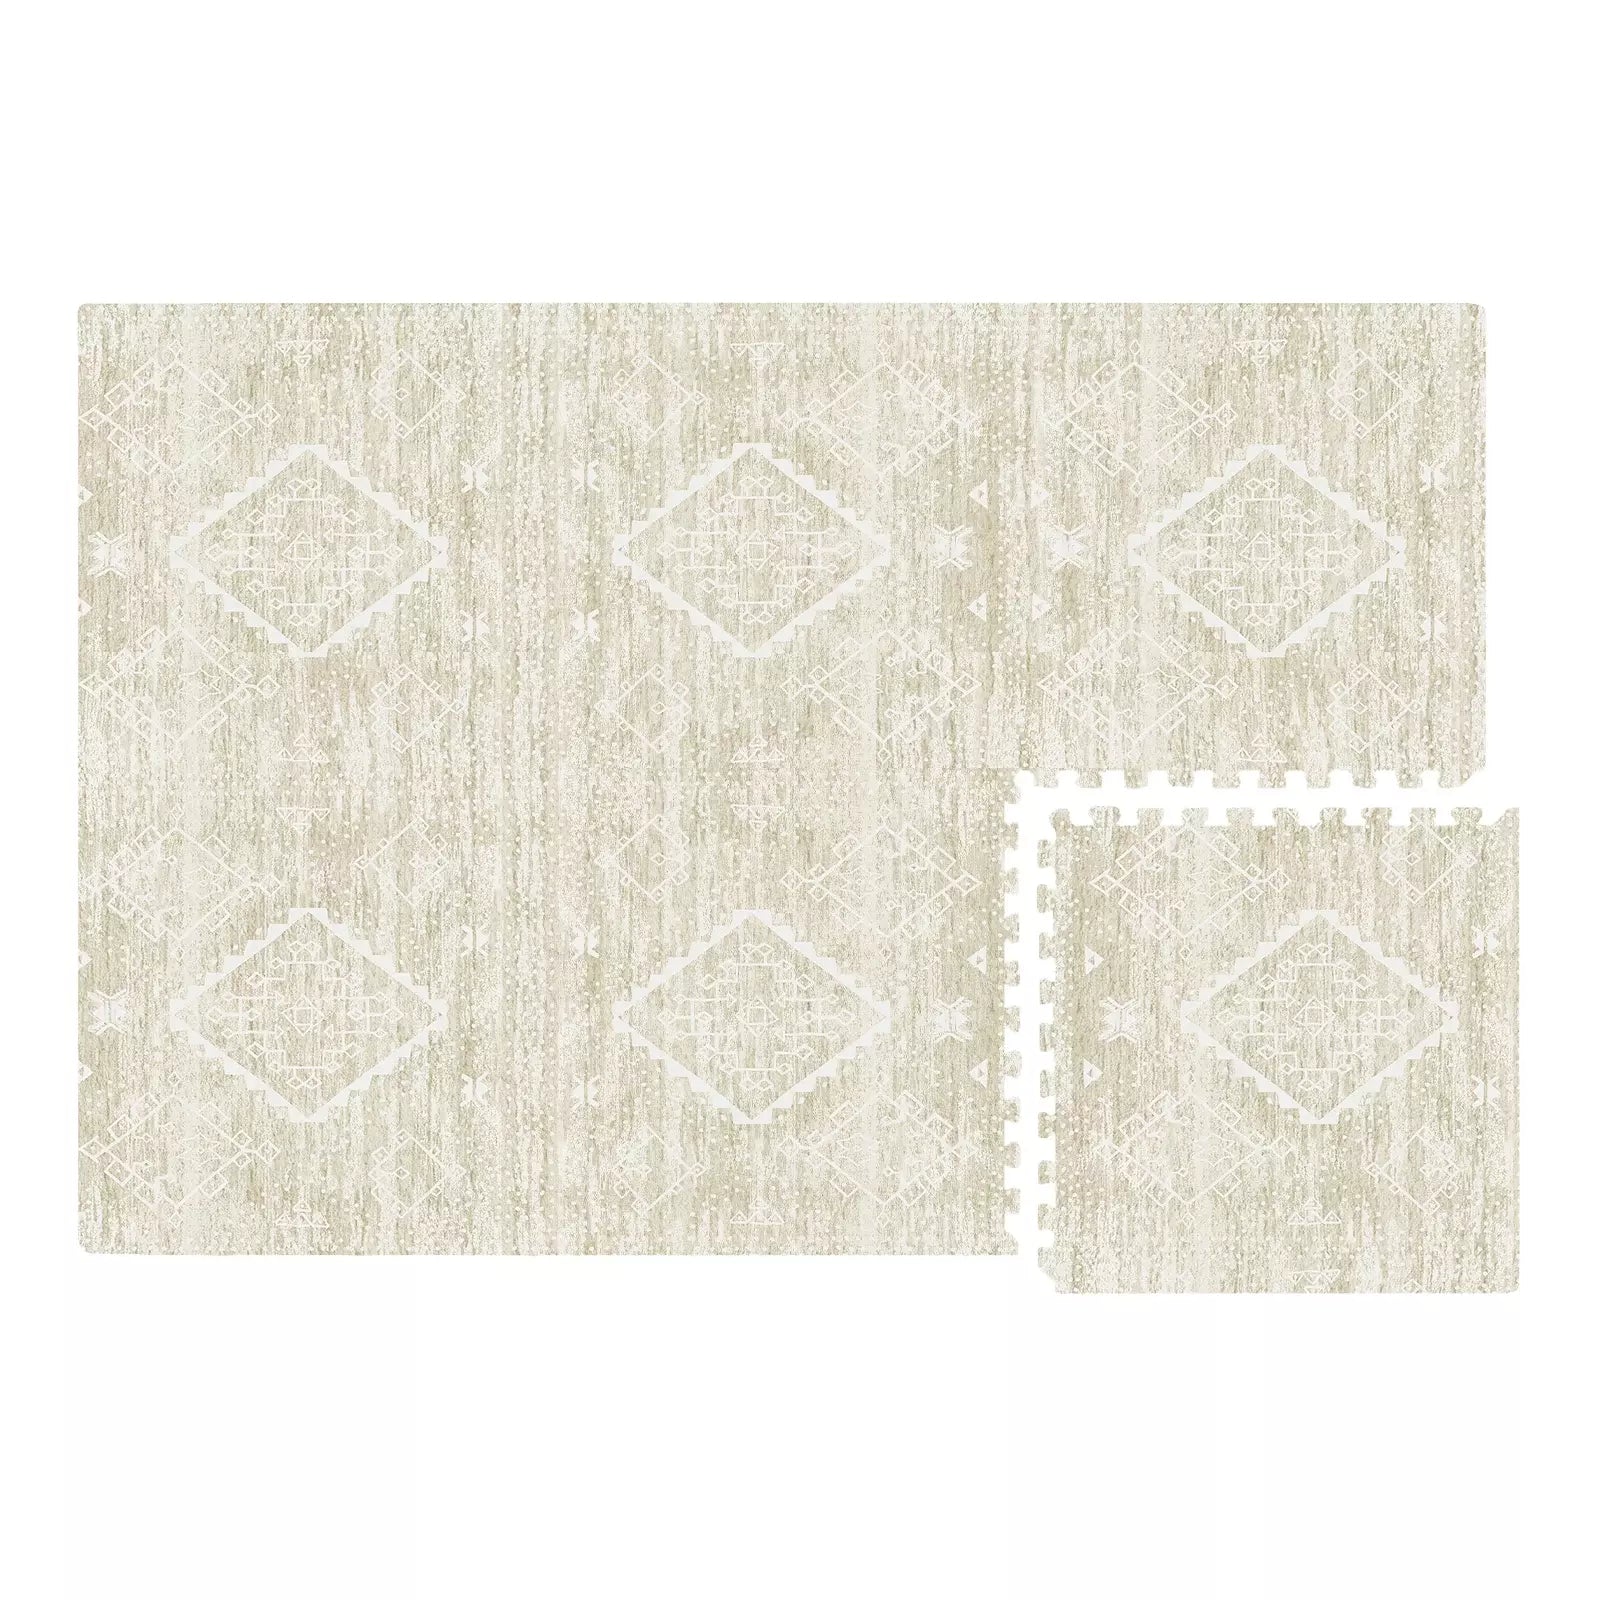 Overhead image of the Ula Straw neutral tan minimal boho pattern play mat shown in size 4x6 with 1 tile removed